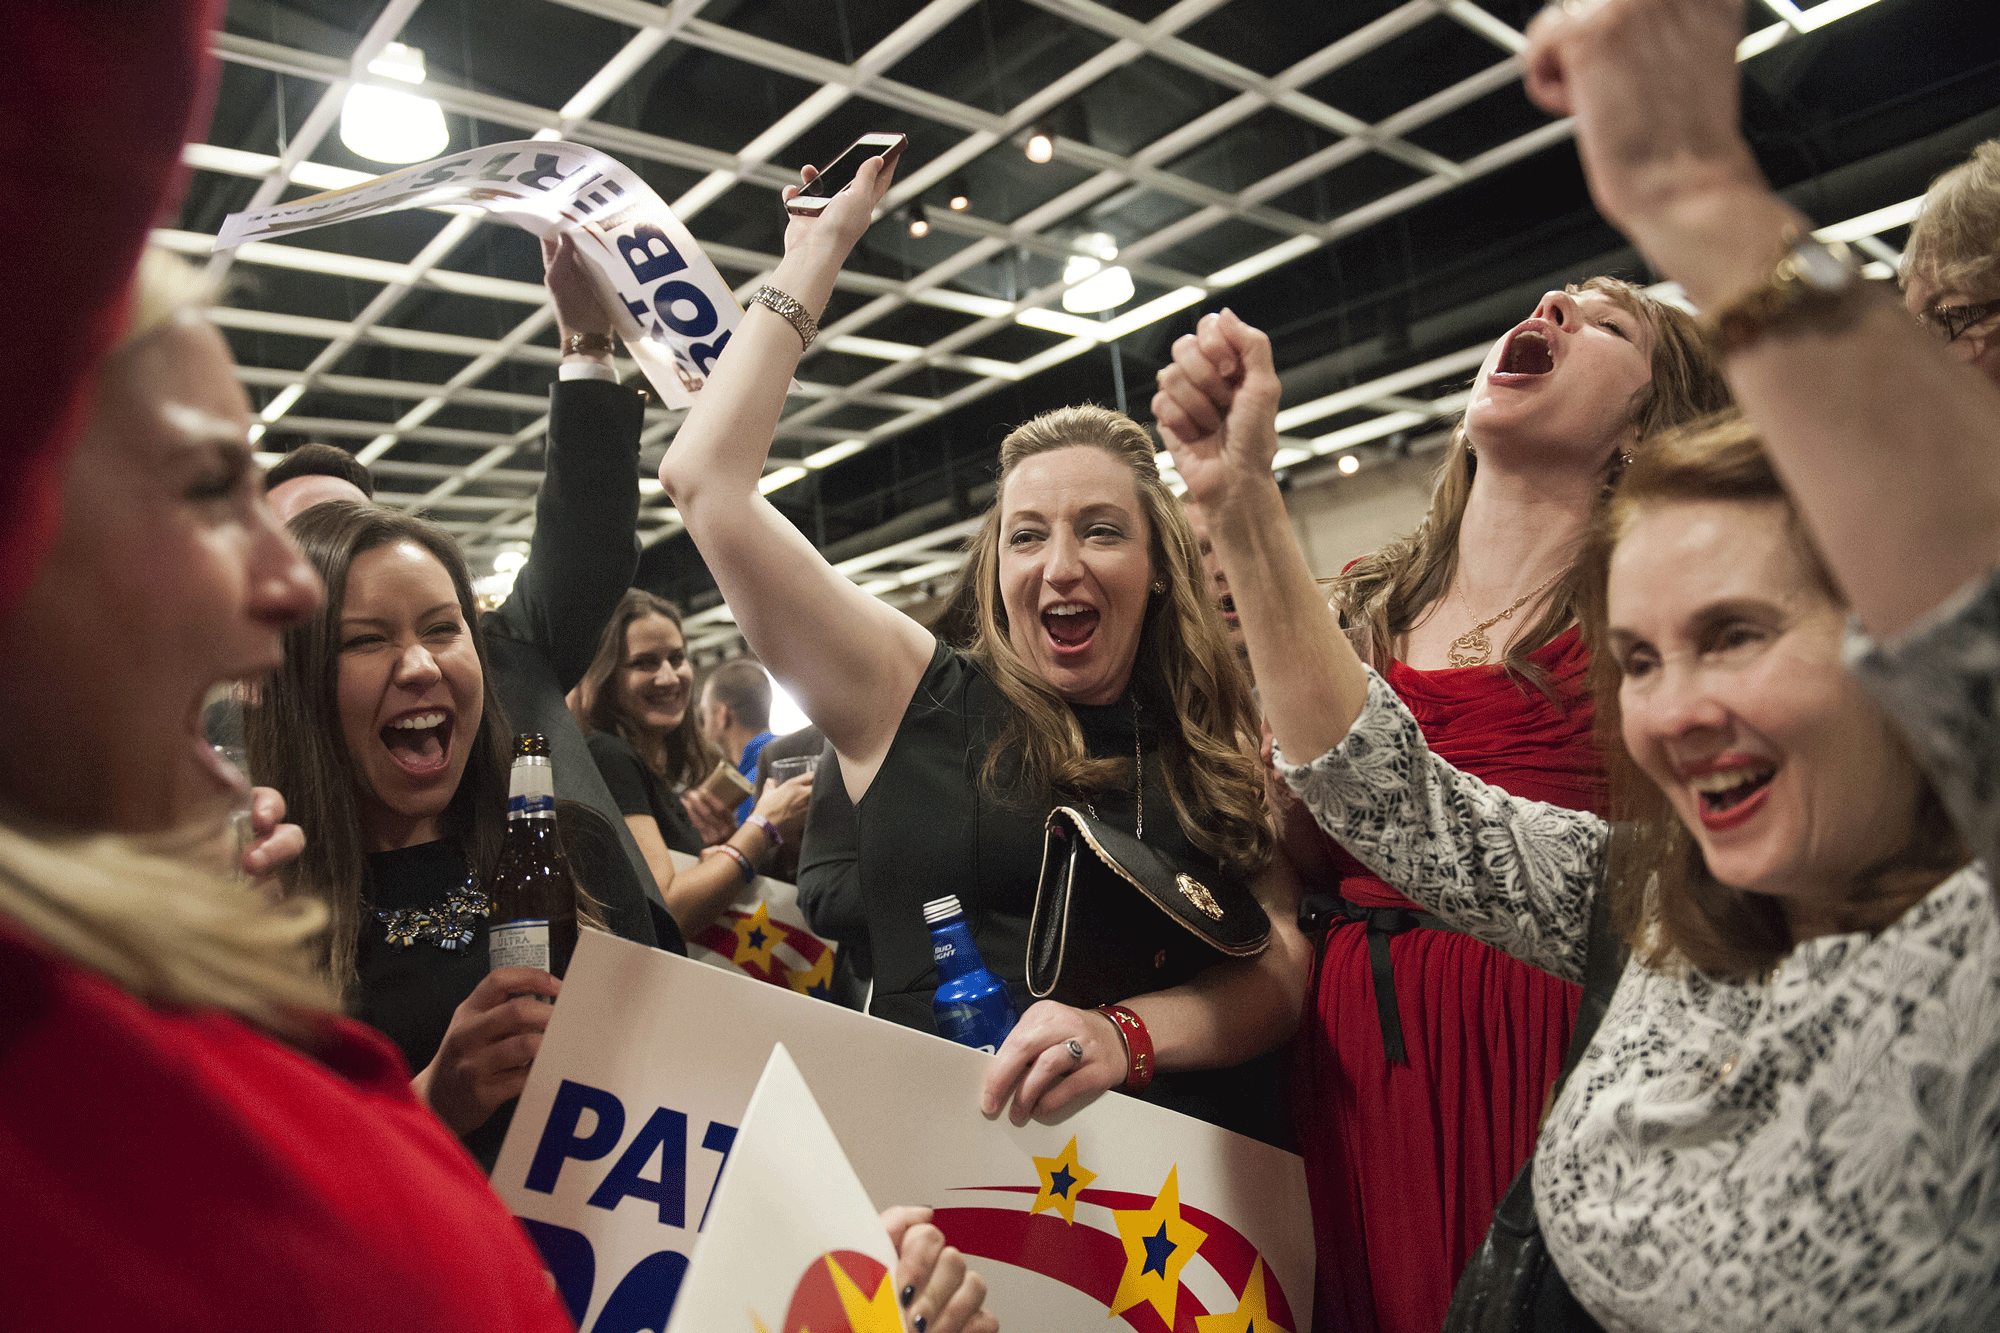 Supporters of Republican Pat Roberts react to announcements of the midterm elections results in Topeka, Kansas, November 4, 2014. REUTERS/Mark Kauzlarich (UNITED STATES - Tags: POLITICS ELECTIONS) [Mark Kauzlarich]